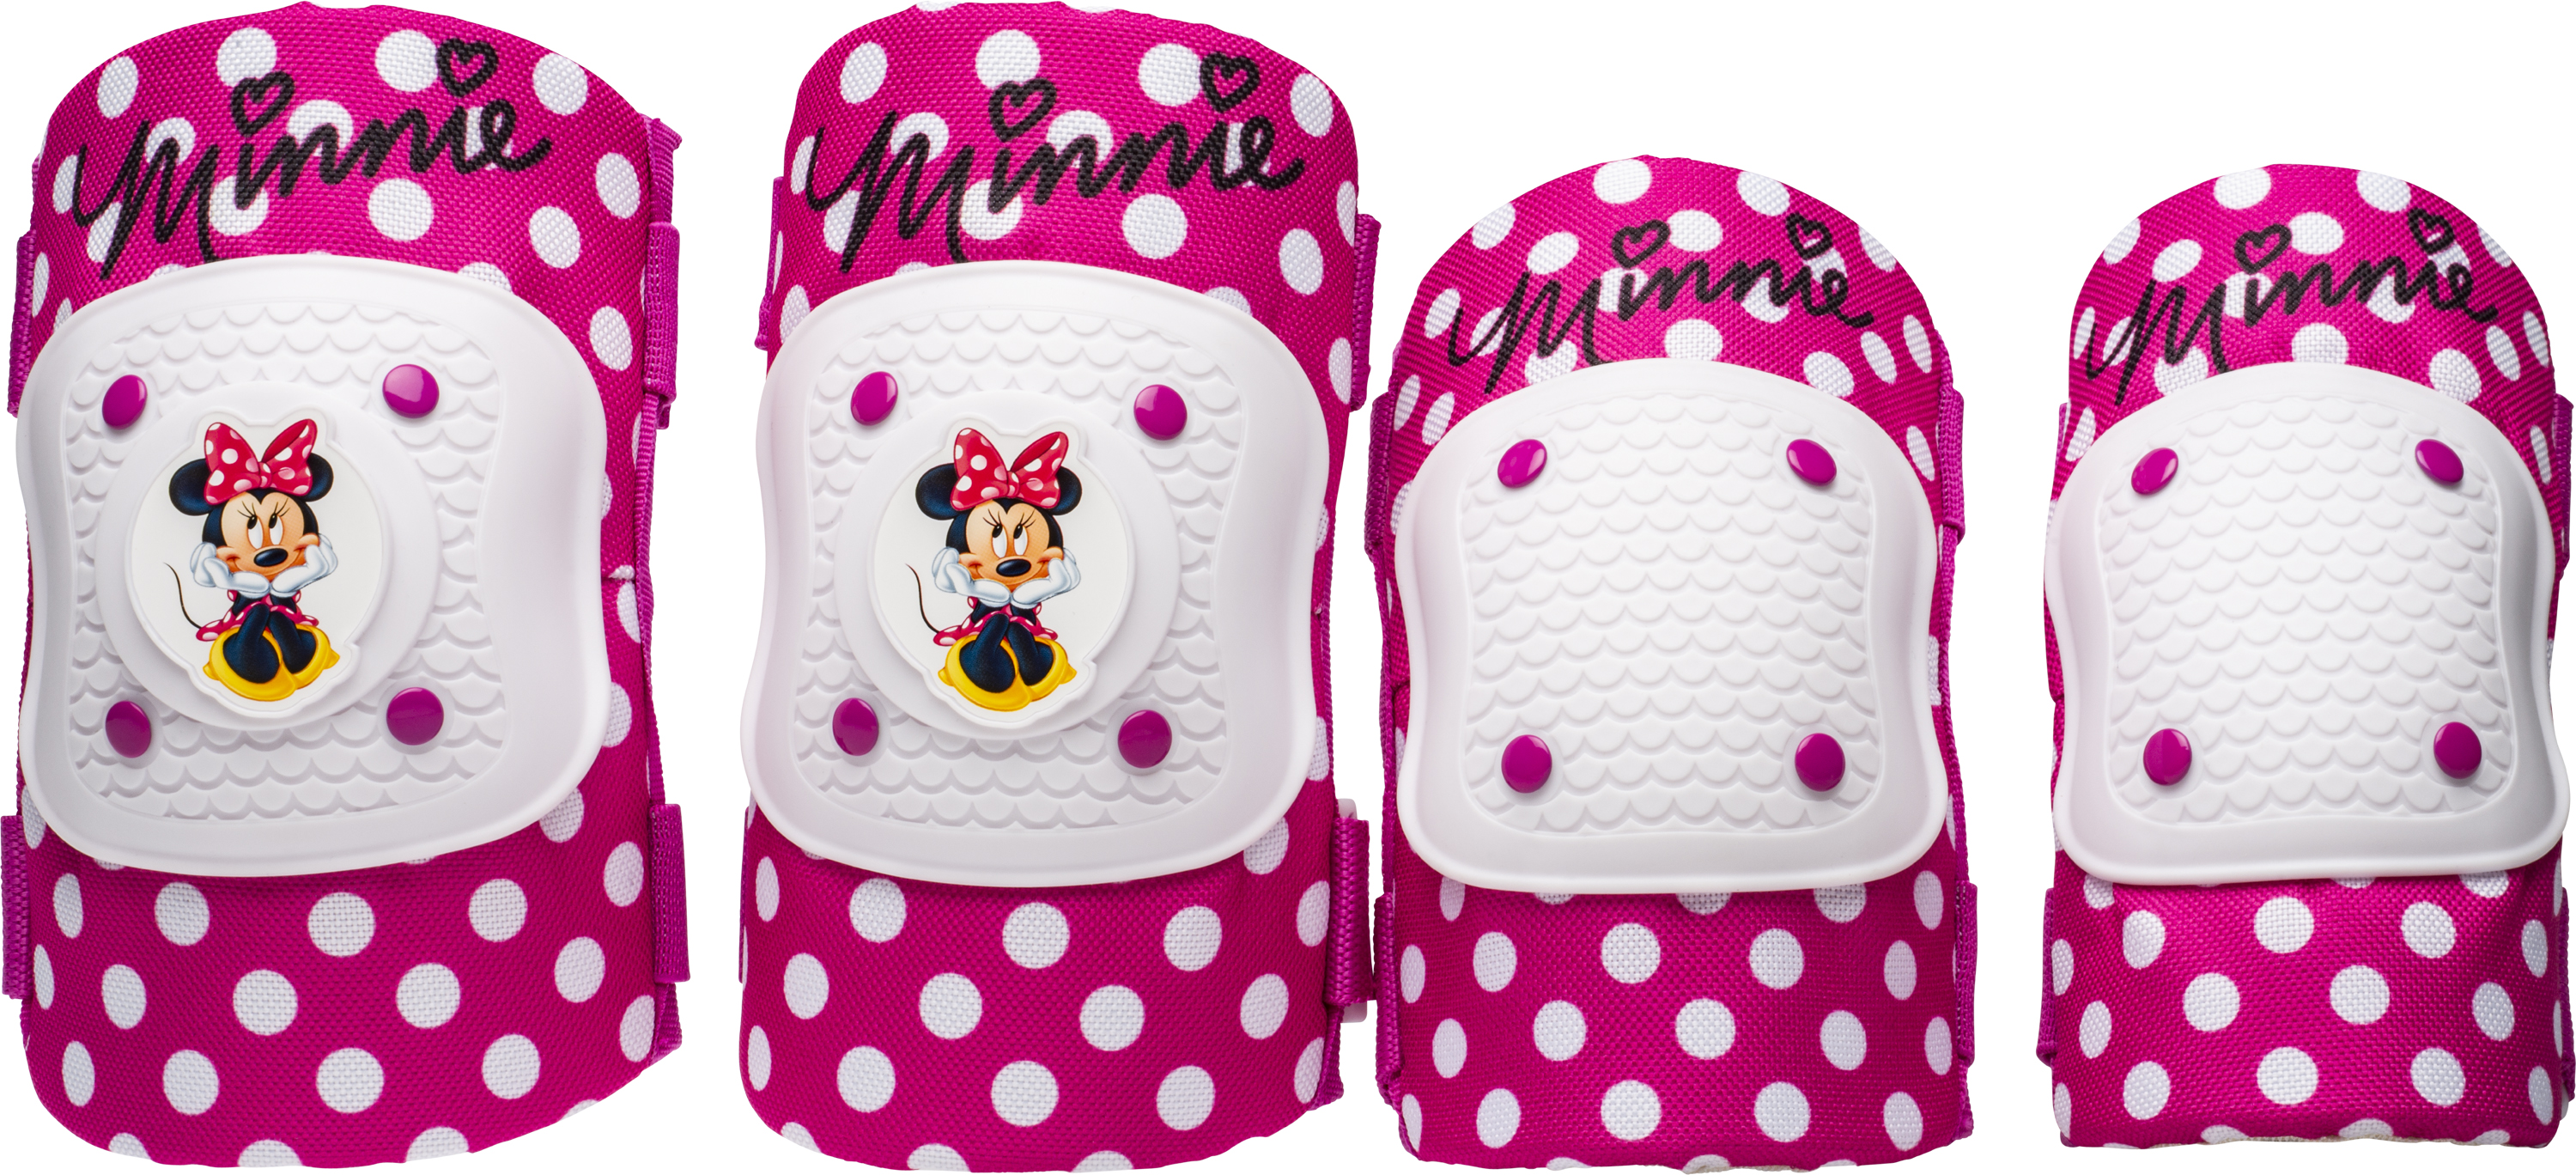 Disney Minnie Mouse Elbow & Knee Pad Set with Bike Bell Value Pack - image 1 of 5